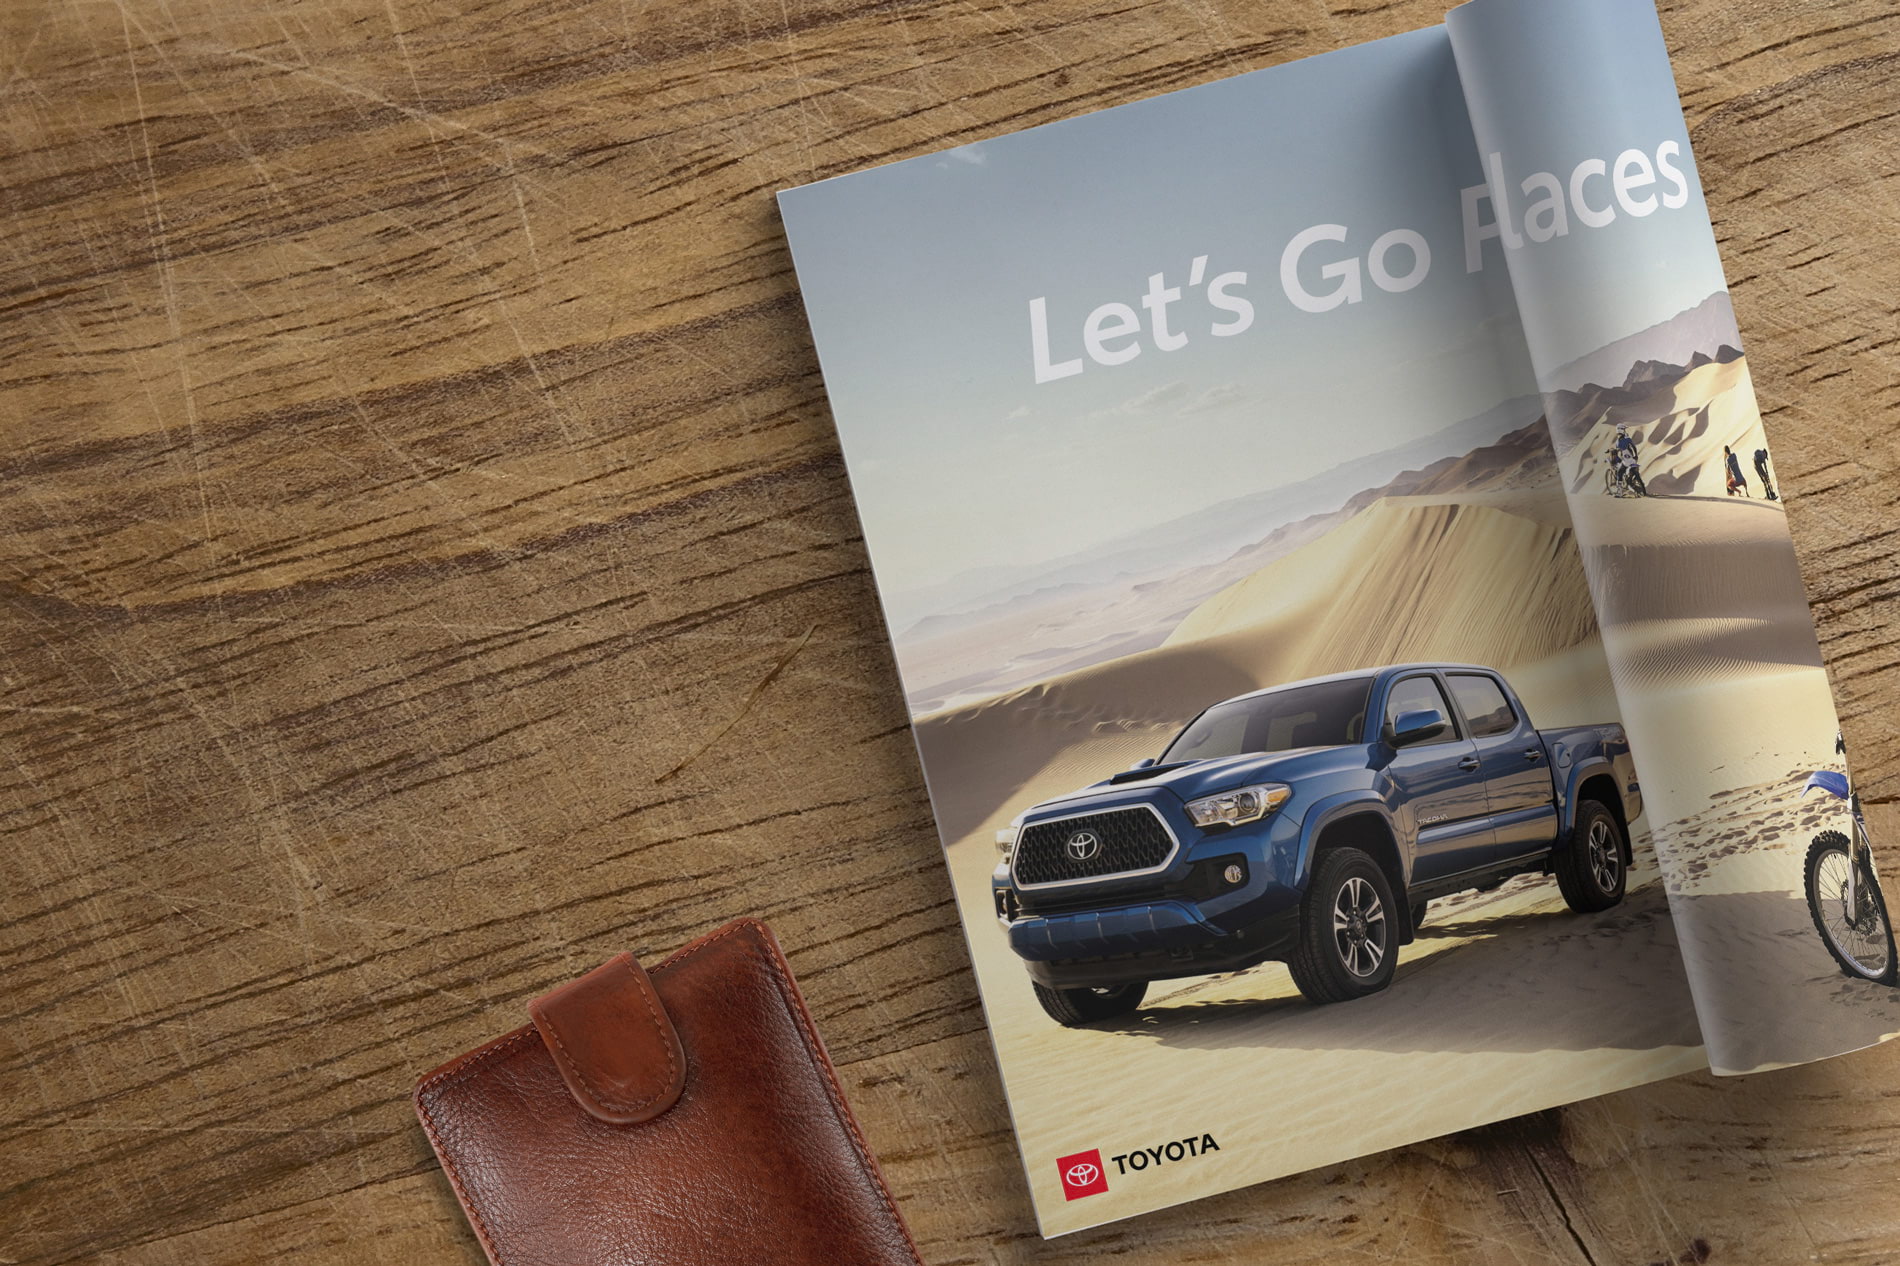 Print layout with Let's Go Places headline and brand logo